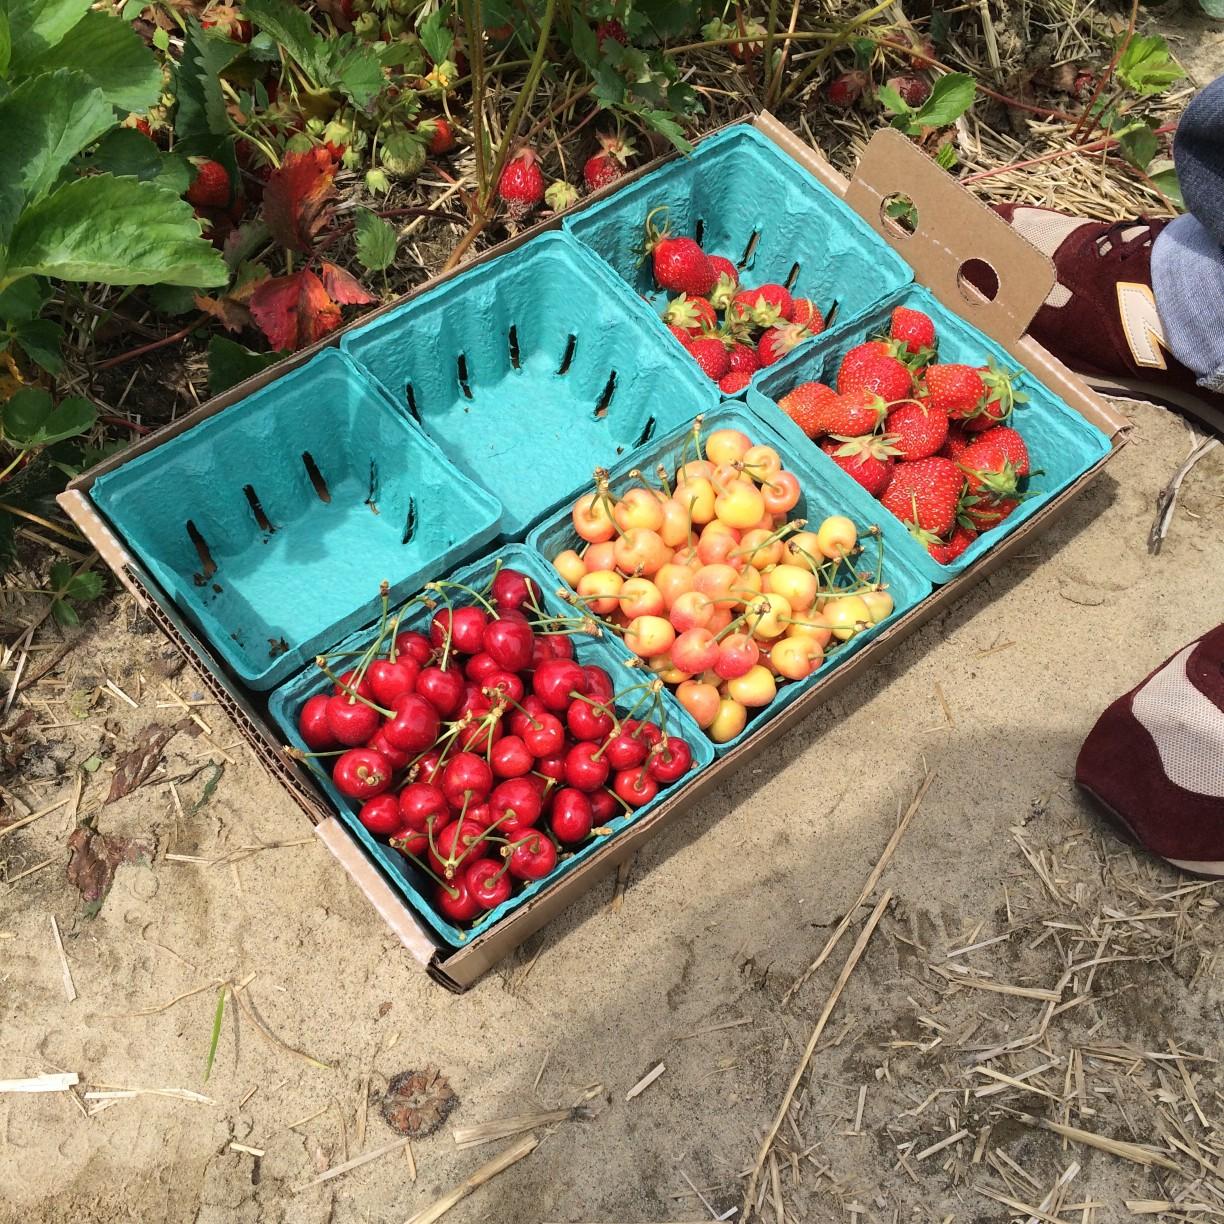 Fruit picked at a South Jersey farm